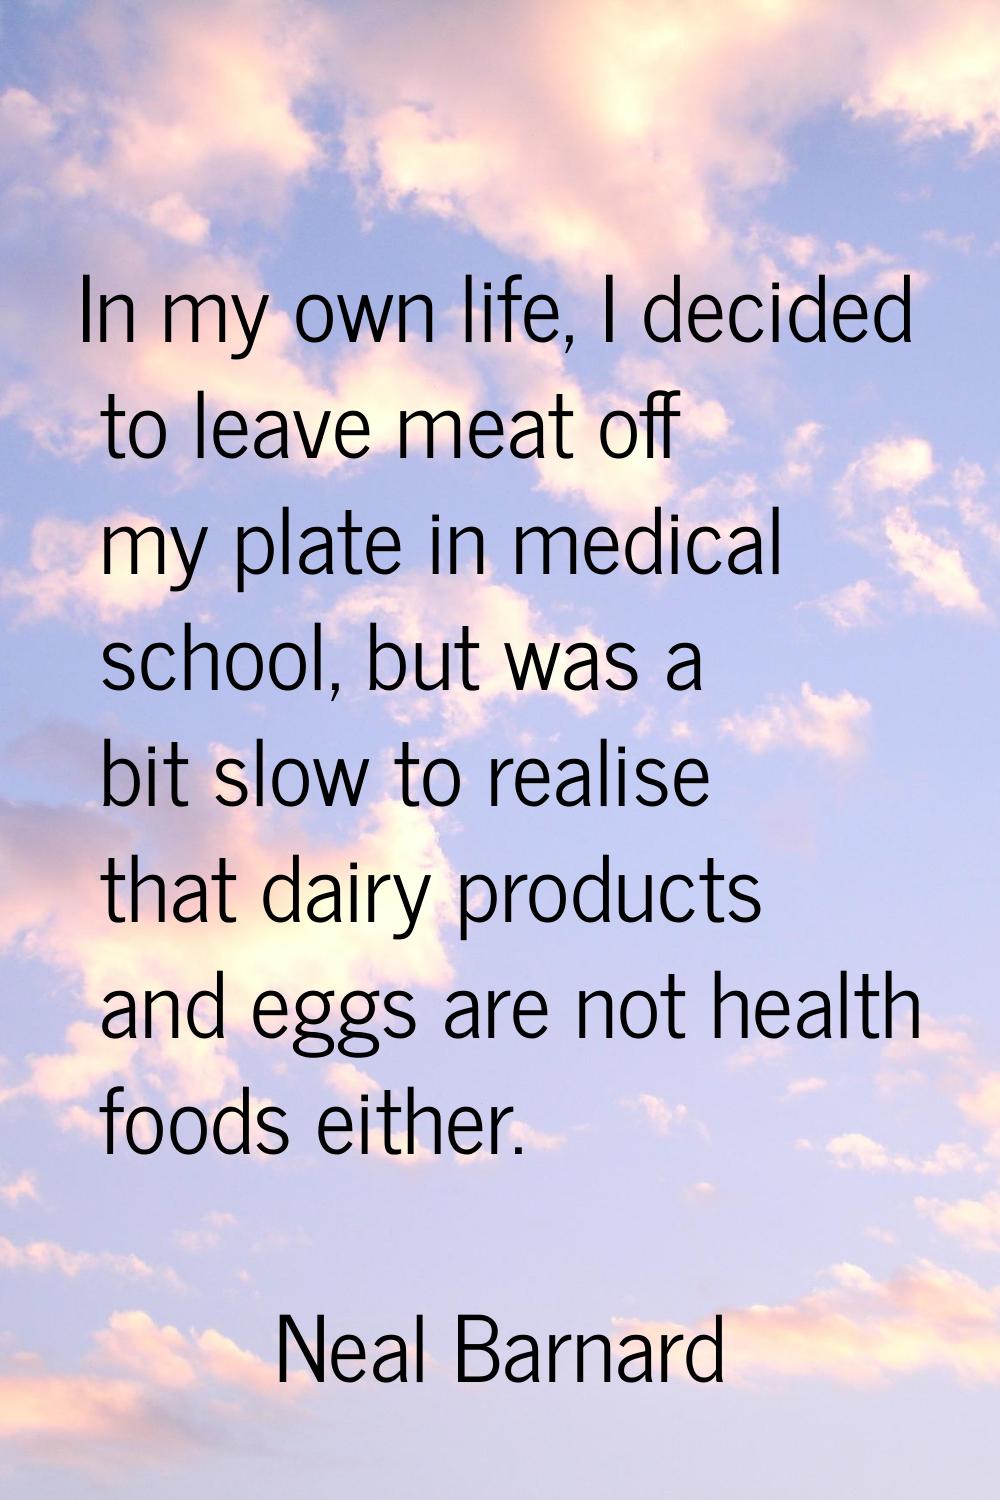 In my own life, I decided to leave meat off my plate in medical school, but was a bit slow to reali